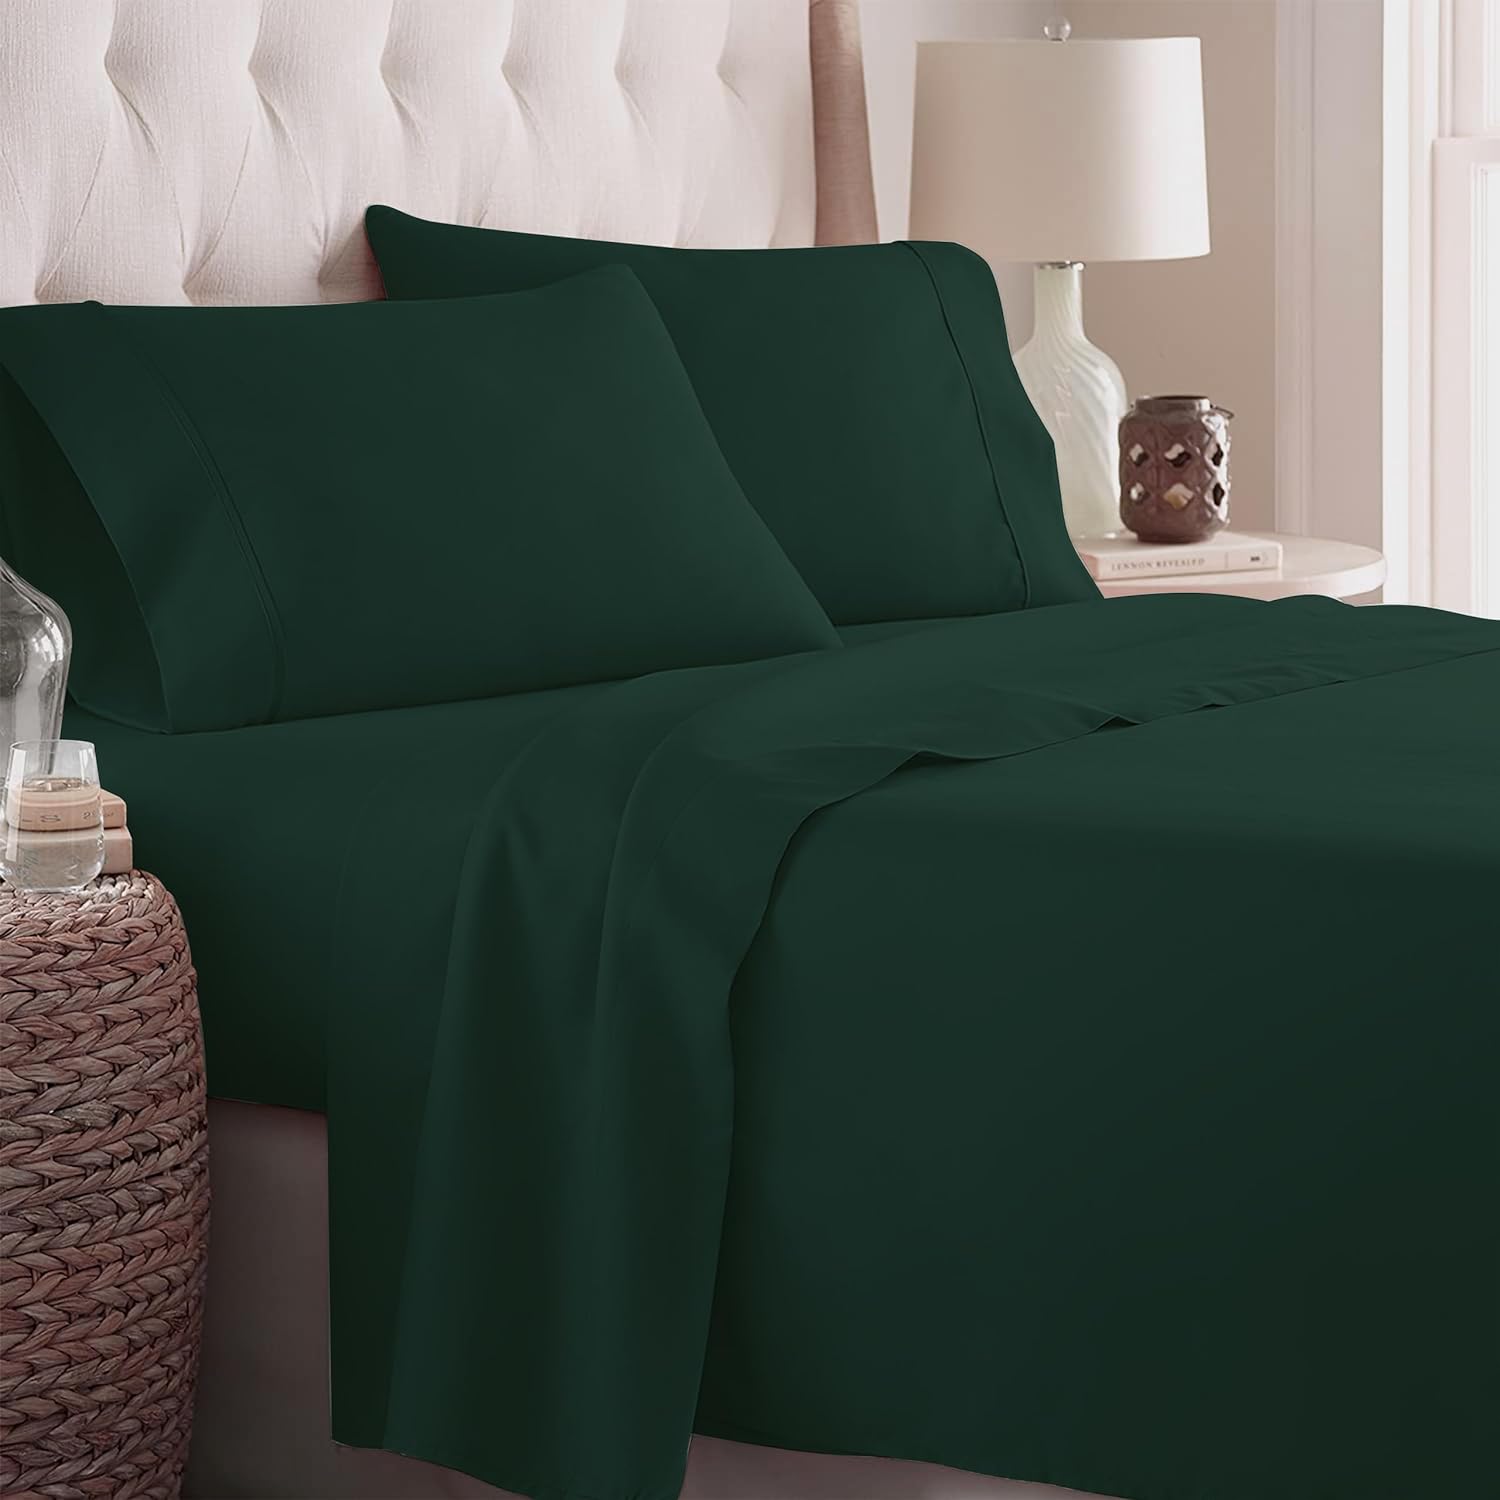 I ordered this sheet set as an extra to have on hand, after spending approximately $200.00 on a single set of sheets from MYSHEETSROCK.COM. I really liked my $200.00 sheets and thought they were the best investment Id made for myself in a long time. I was shocked when I started using this sheet set! They are a fraction of the cost, they fit my King size mattress much better than the aforementioned set, they are much more sturdy and comfortable to boot! Not to mention, this set includes 4 King